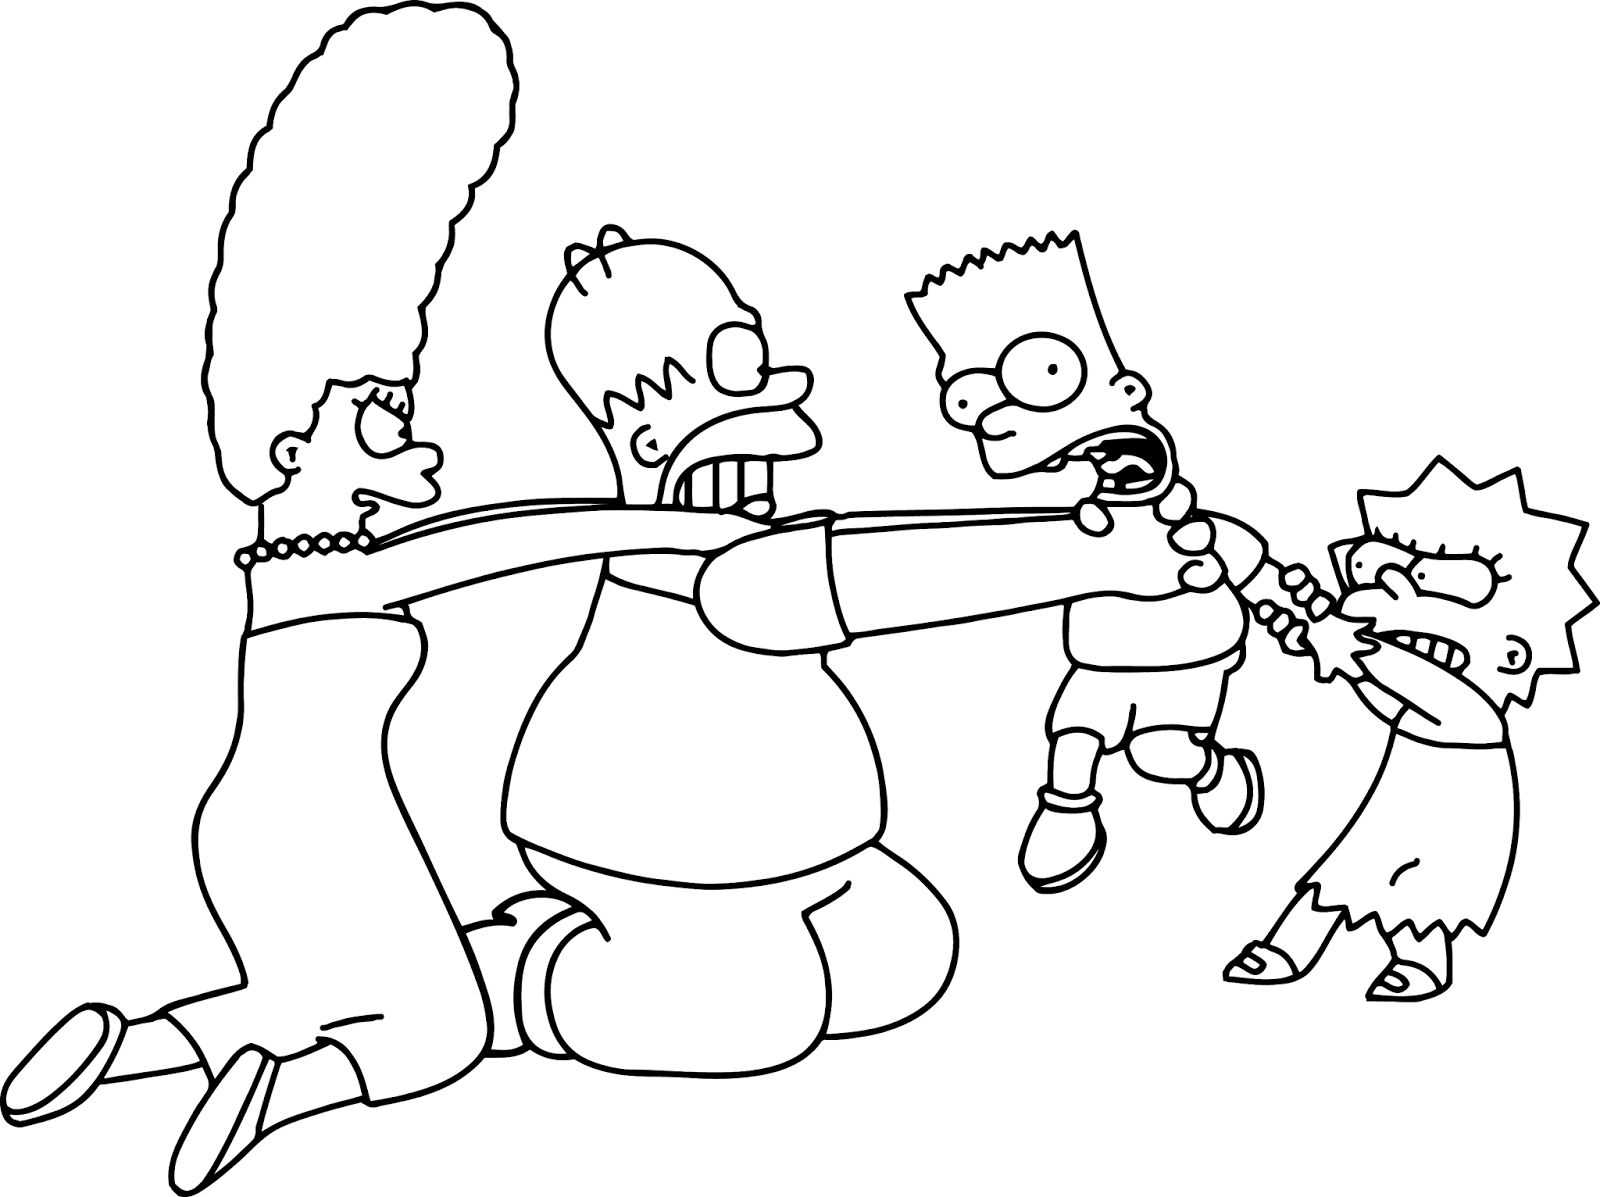 simpsons coloring pages simpsons family at street coloring page wecoloringpagecom pages simpsons coloring 